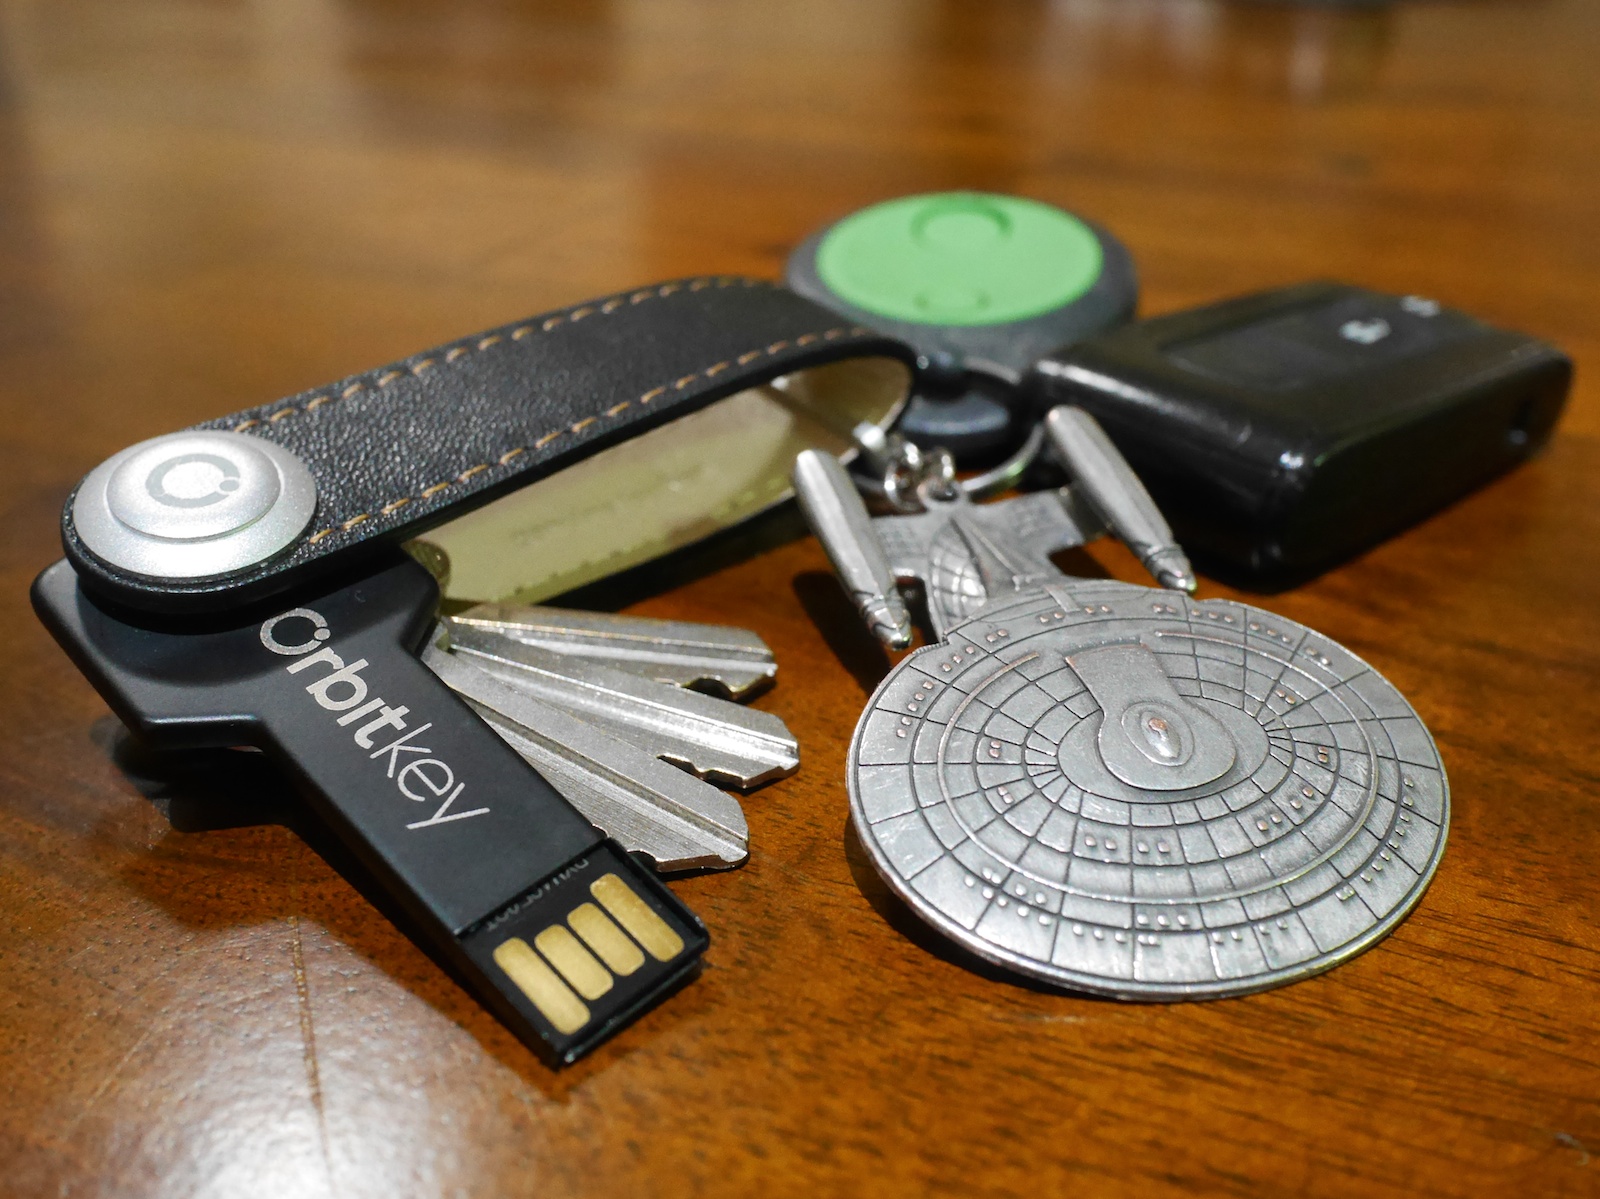 photo of an Orbitkey on a wooden surface with keys and other accessories attached